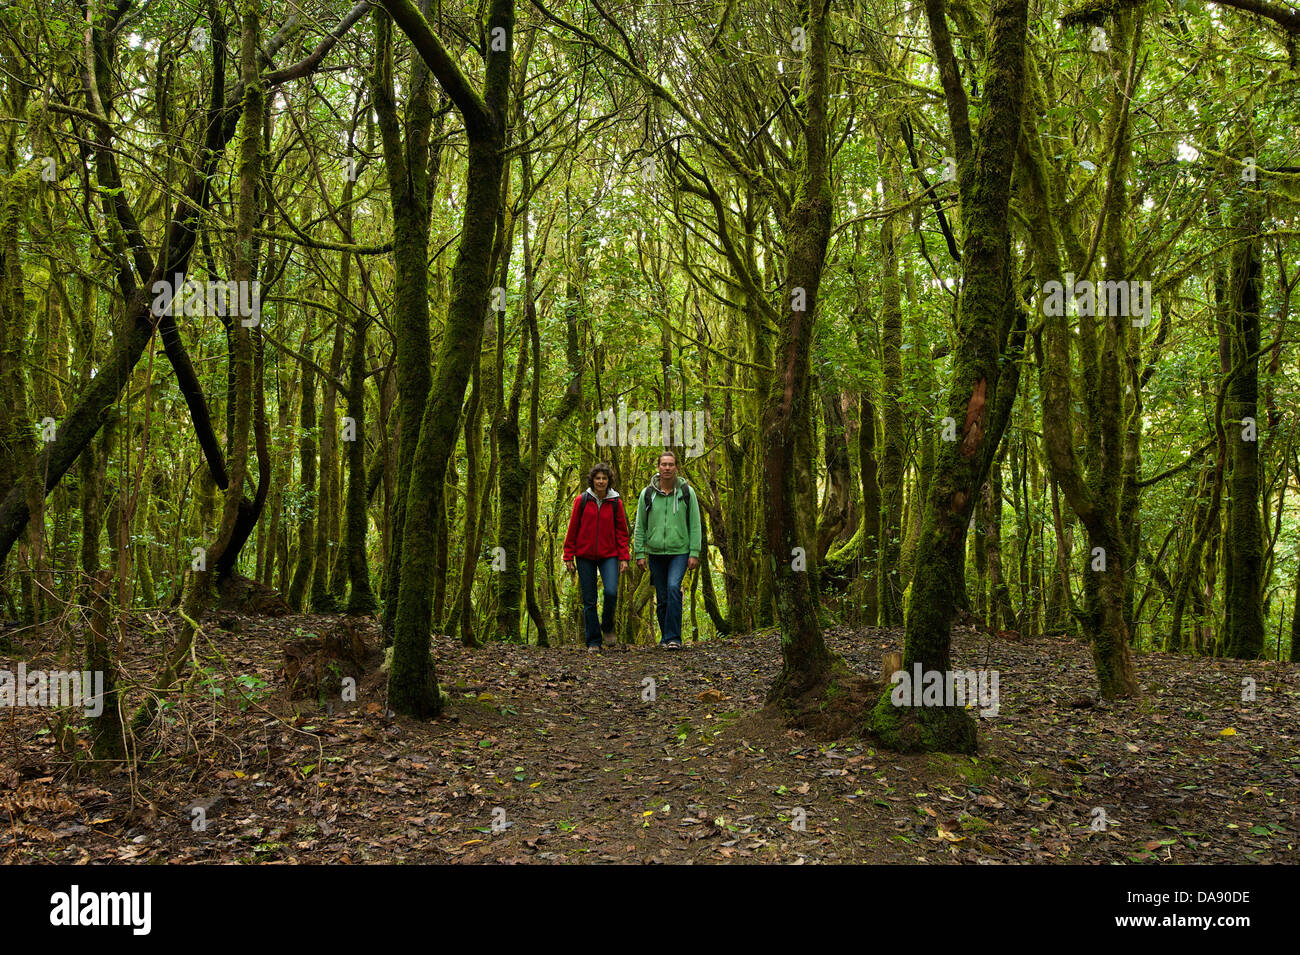 Canaries, Europe, Canary islands, La Gomera, Spain, outside, day, laurel wood, wood, forest, national park, national parks, natu Stock Photo